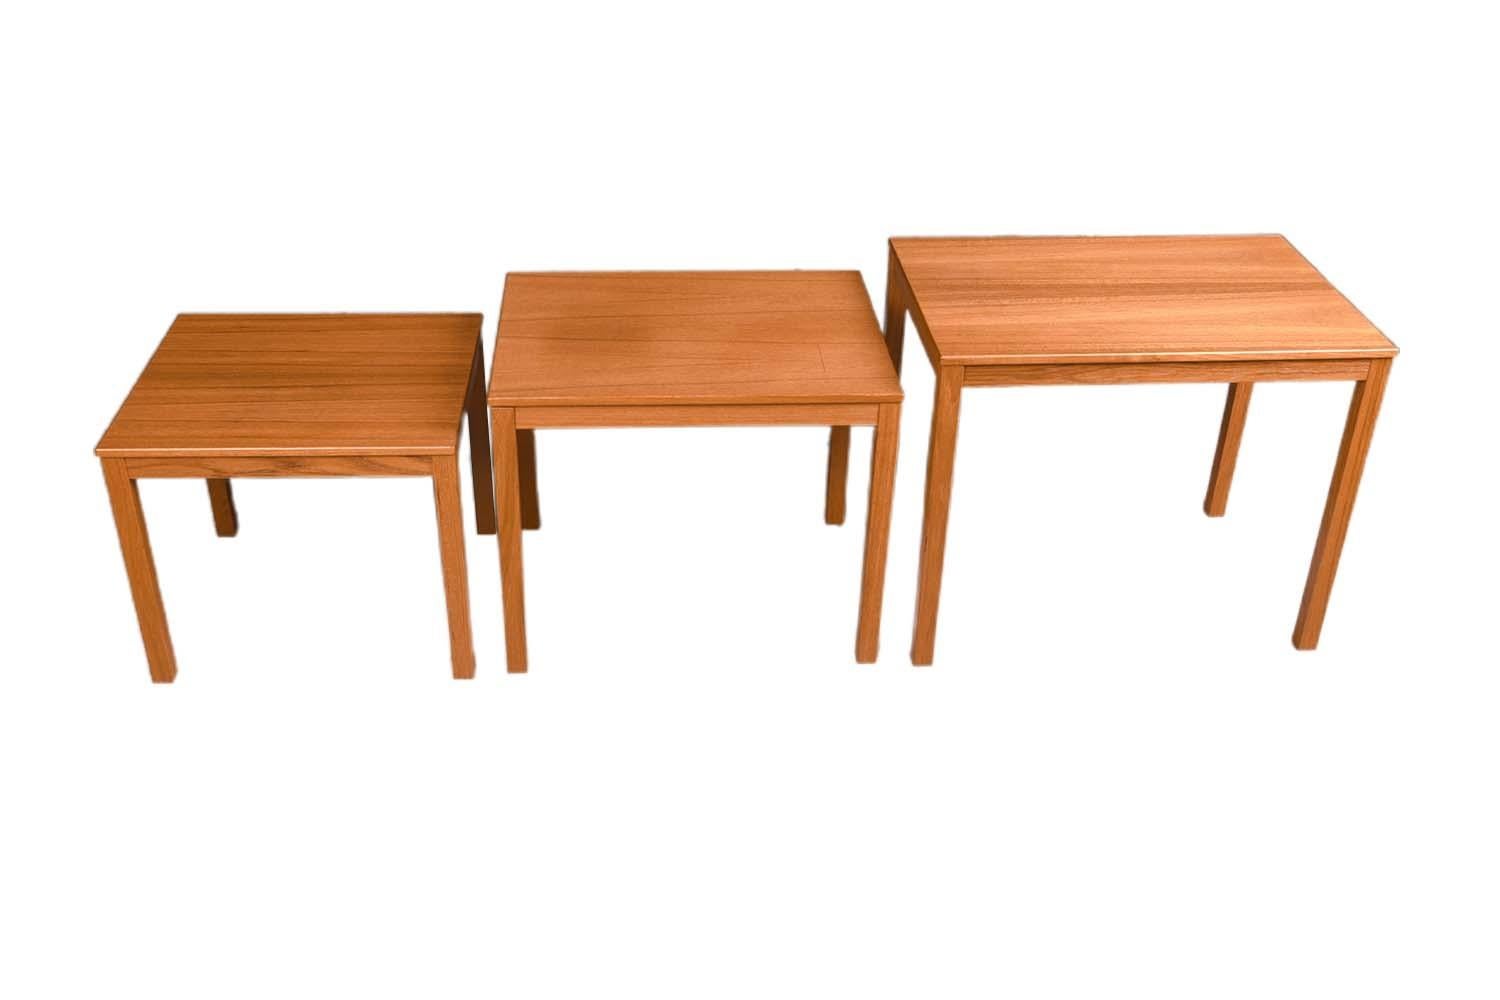 Danish Mid-Century Modern Teak Nesting Tables In Good Condition For Sale In Baltimore, MD